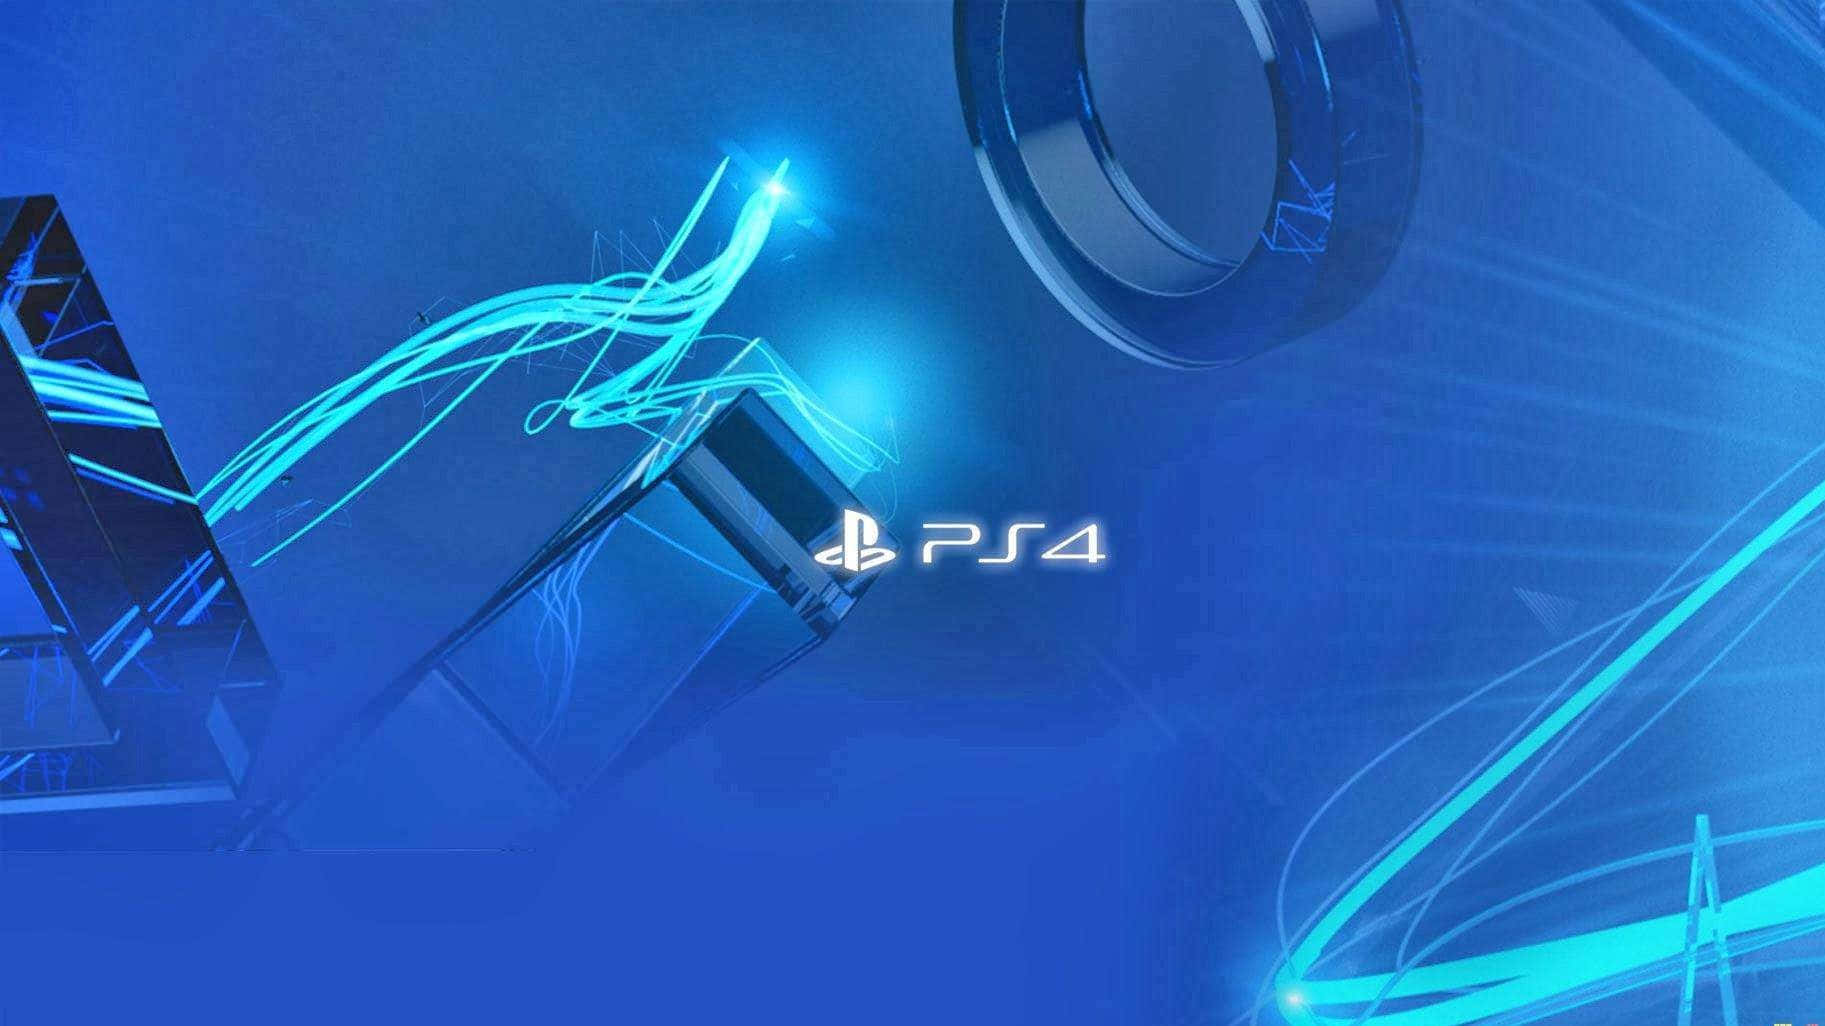 Glowing Dope Ps4 Wallpaper